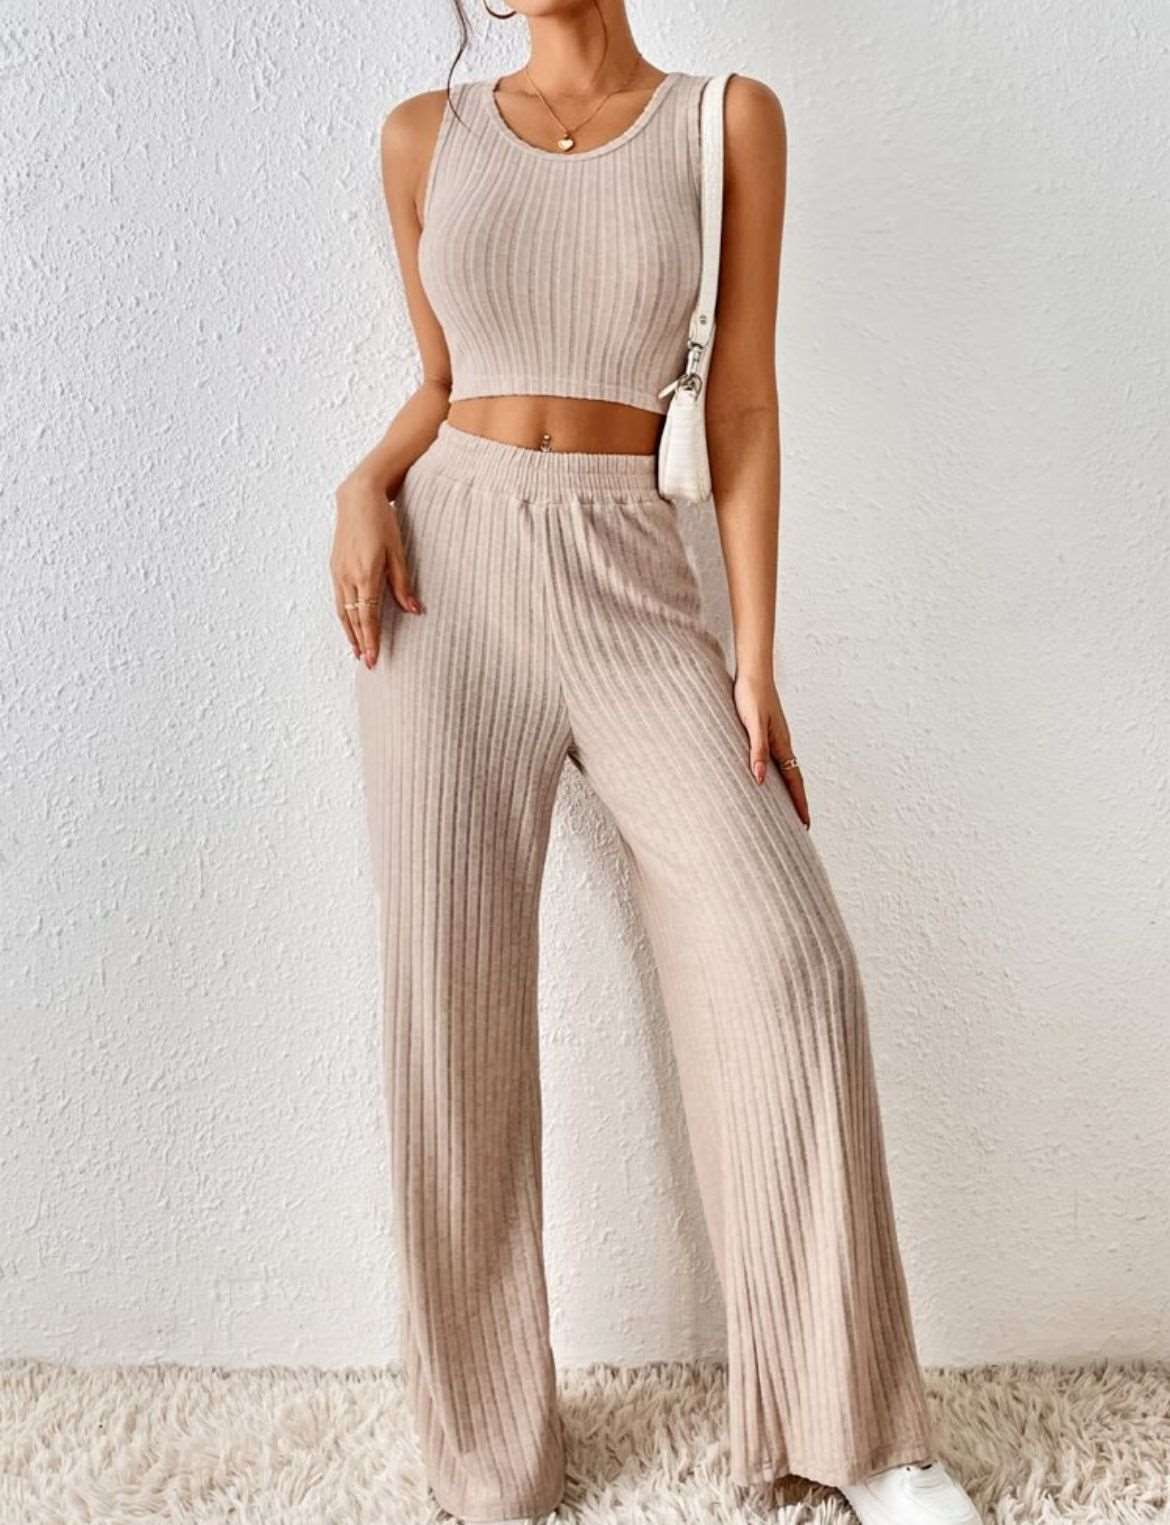 Women's Casual Knitted Top and High Waist Pants Two-piece Outfit Set